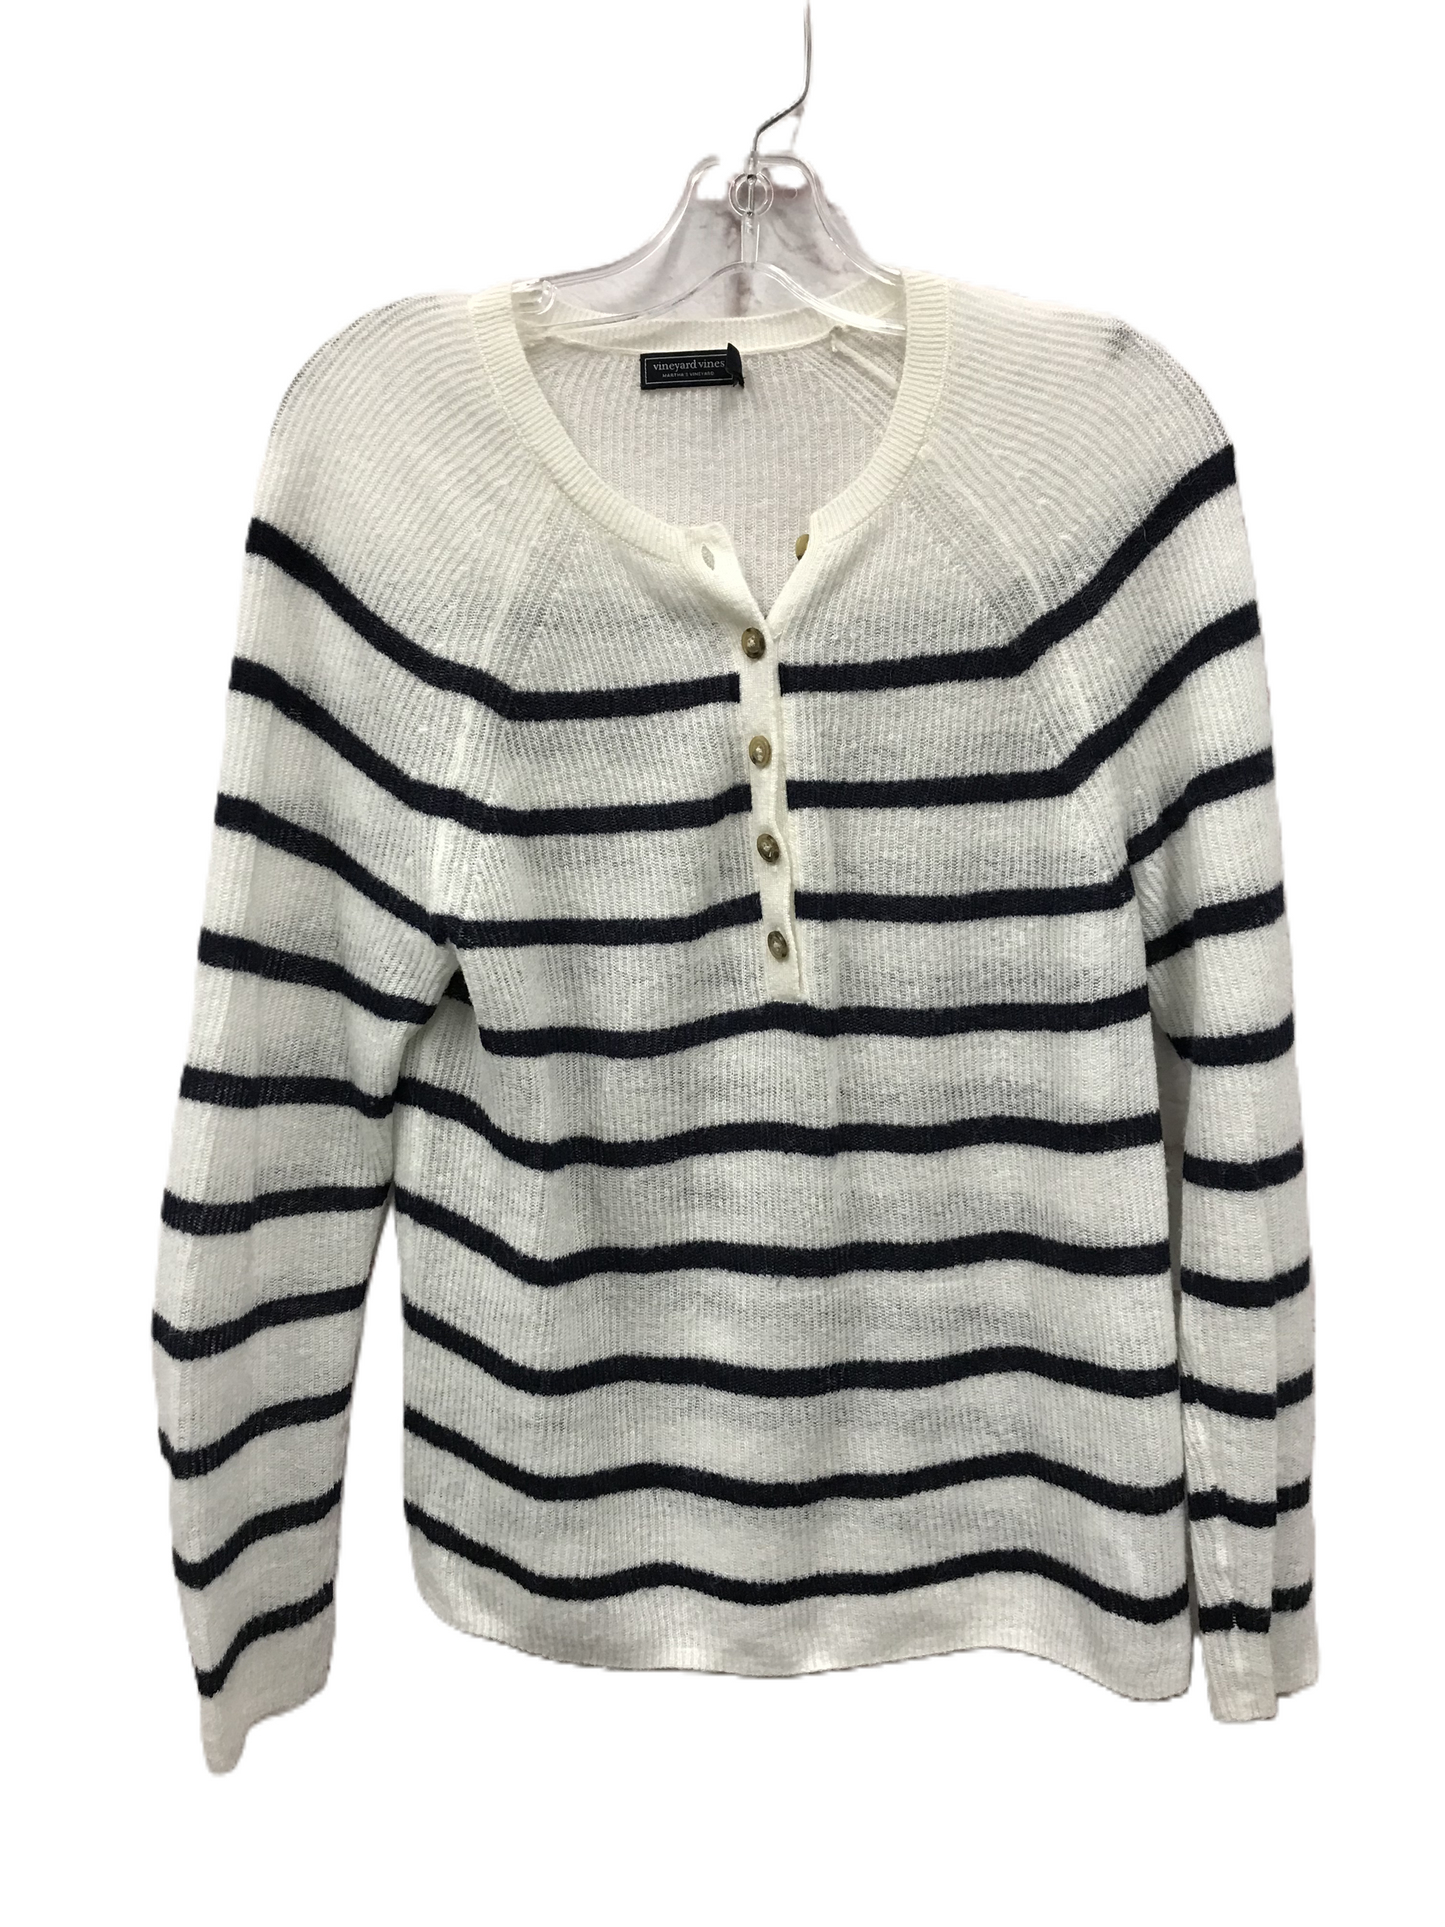 White Sweater By Vineyard Vines, Size: Xs